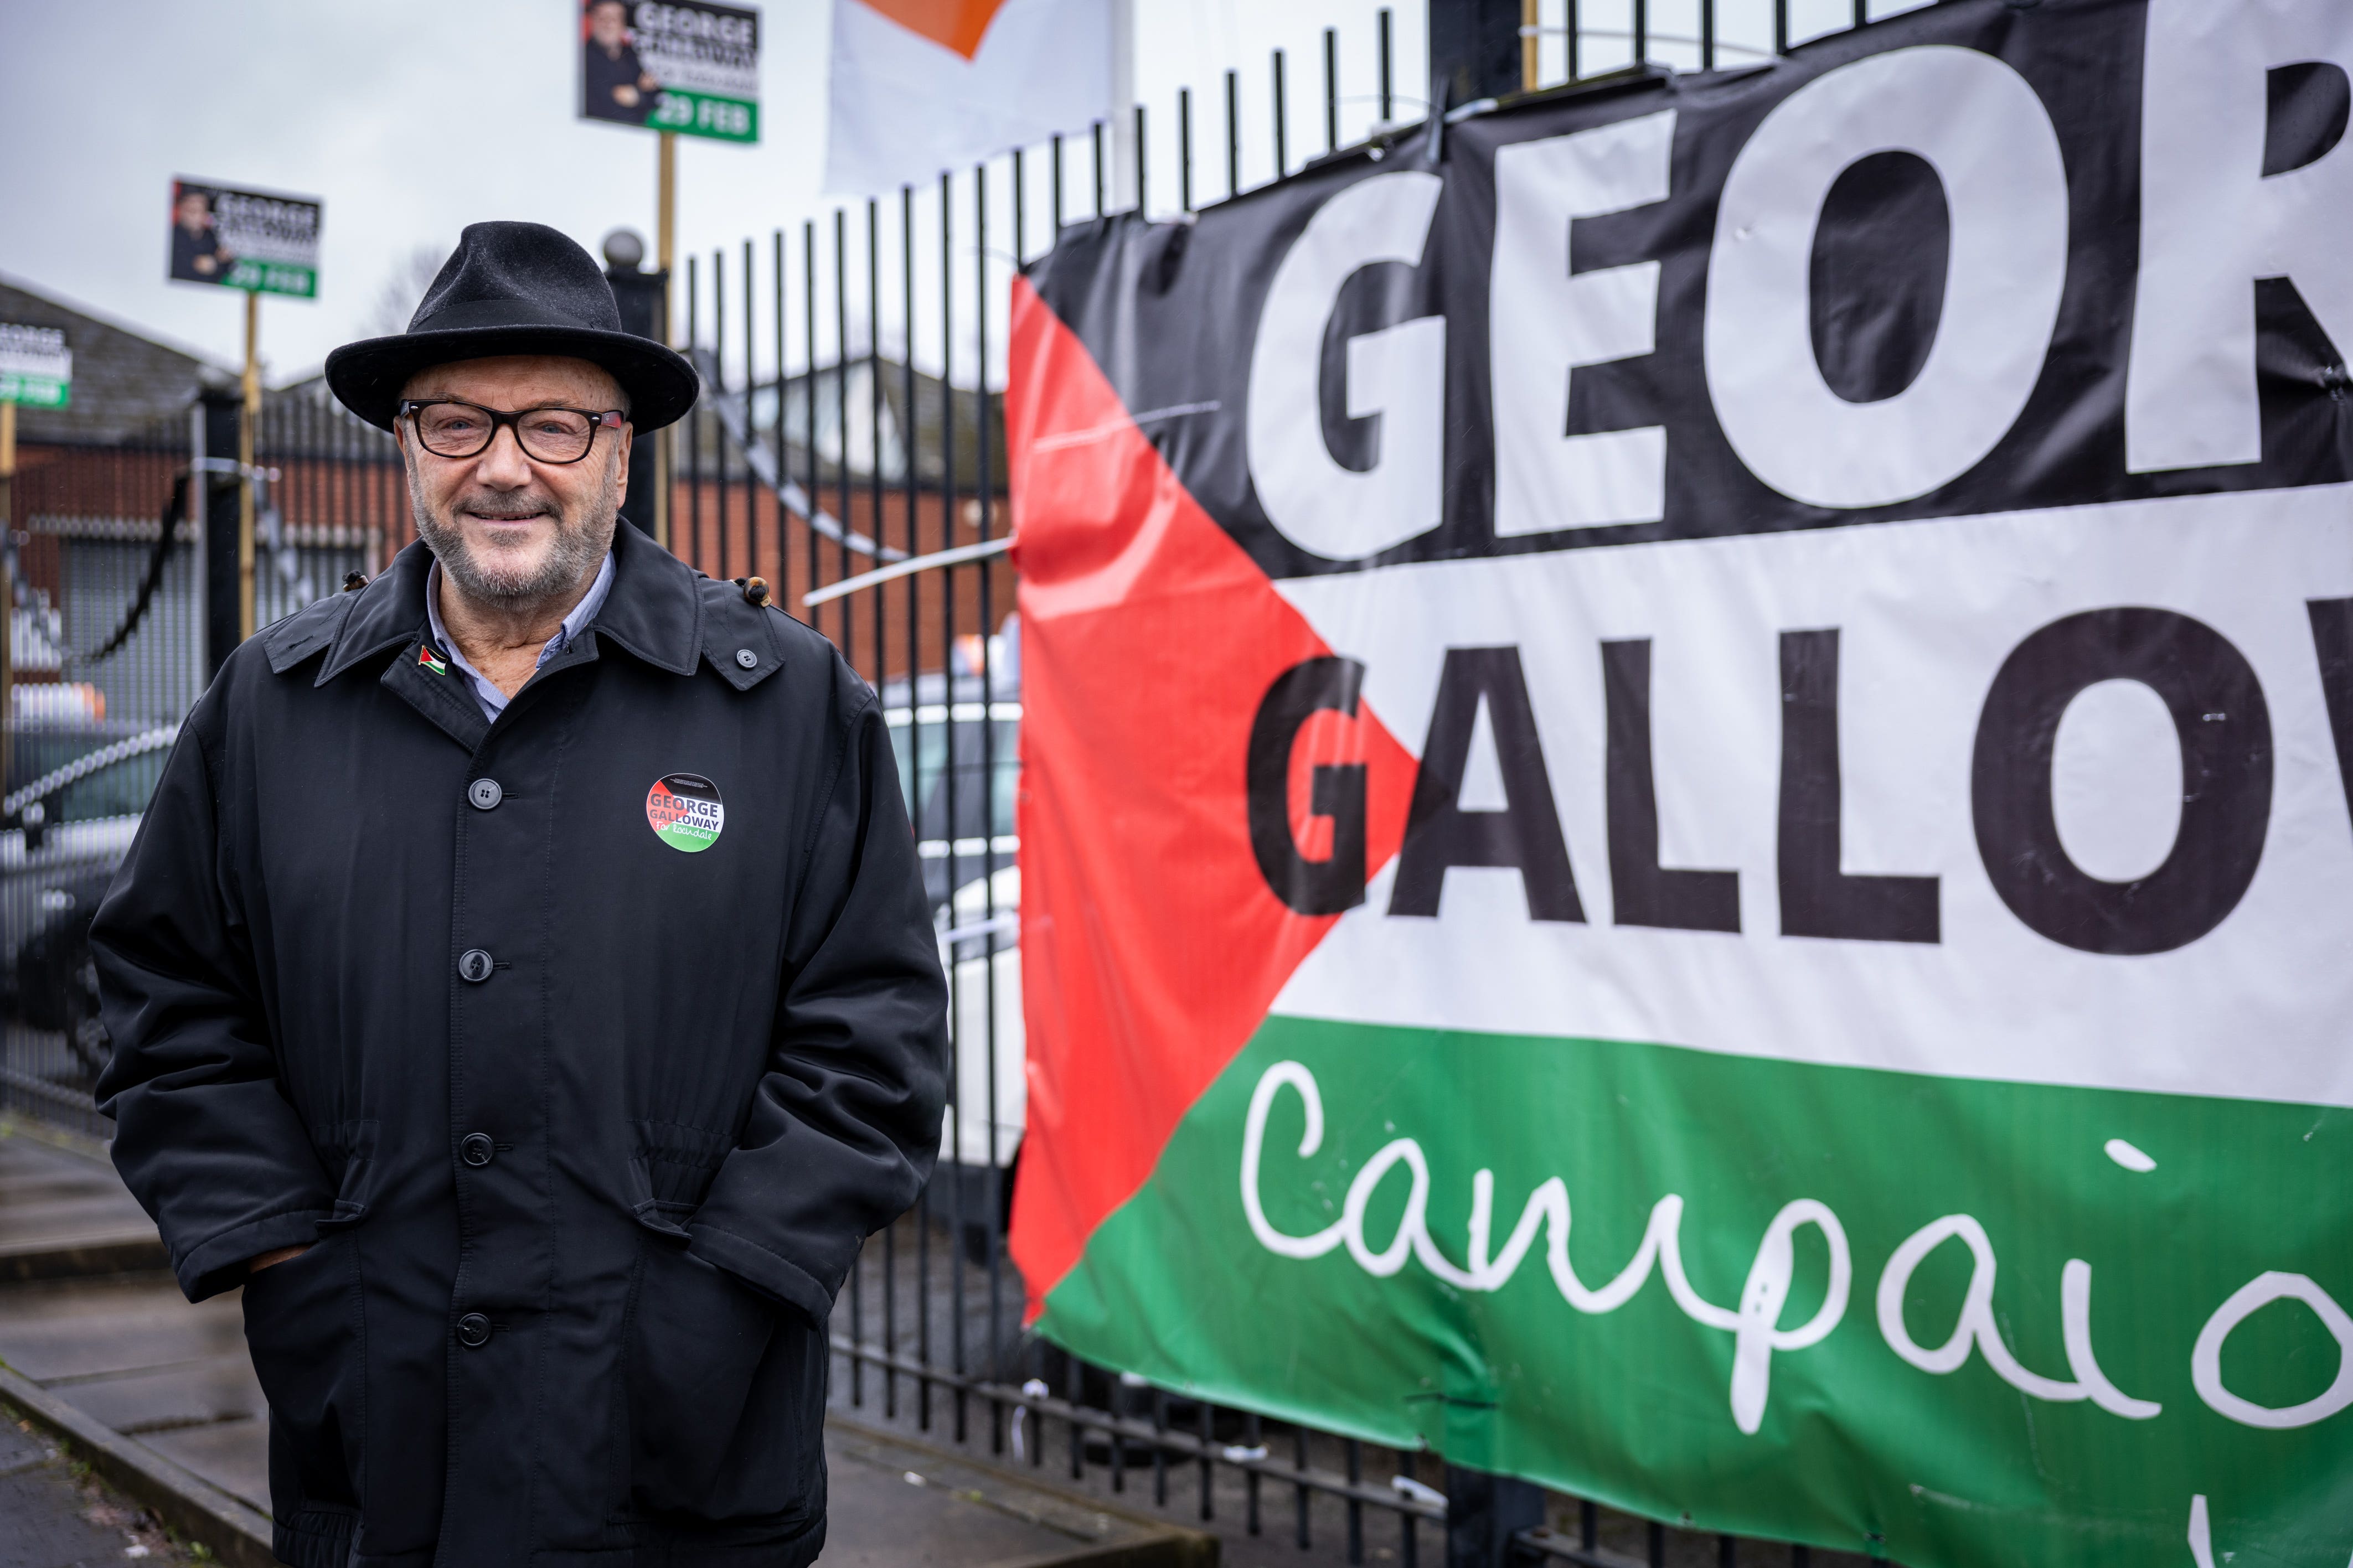 MrGalloway has built a political career on fierce opposition to Western foreign policy, particularly in the Middle East